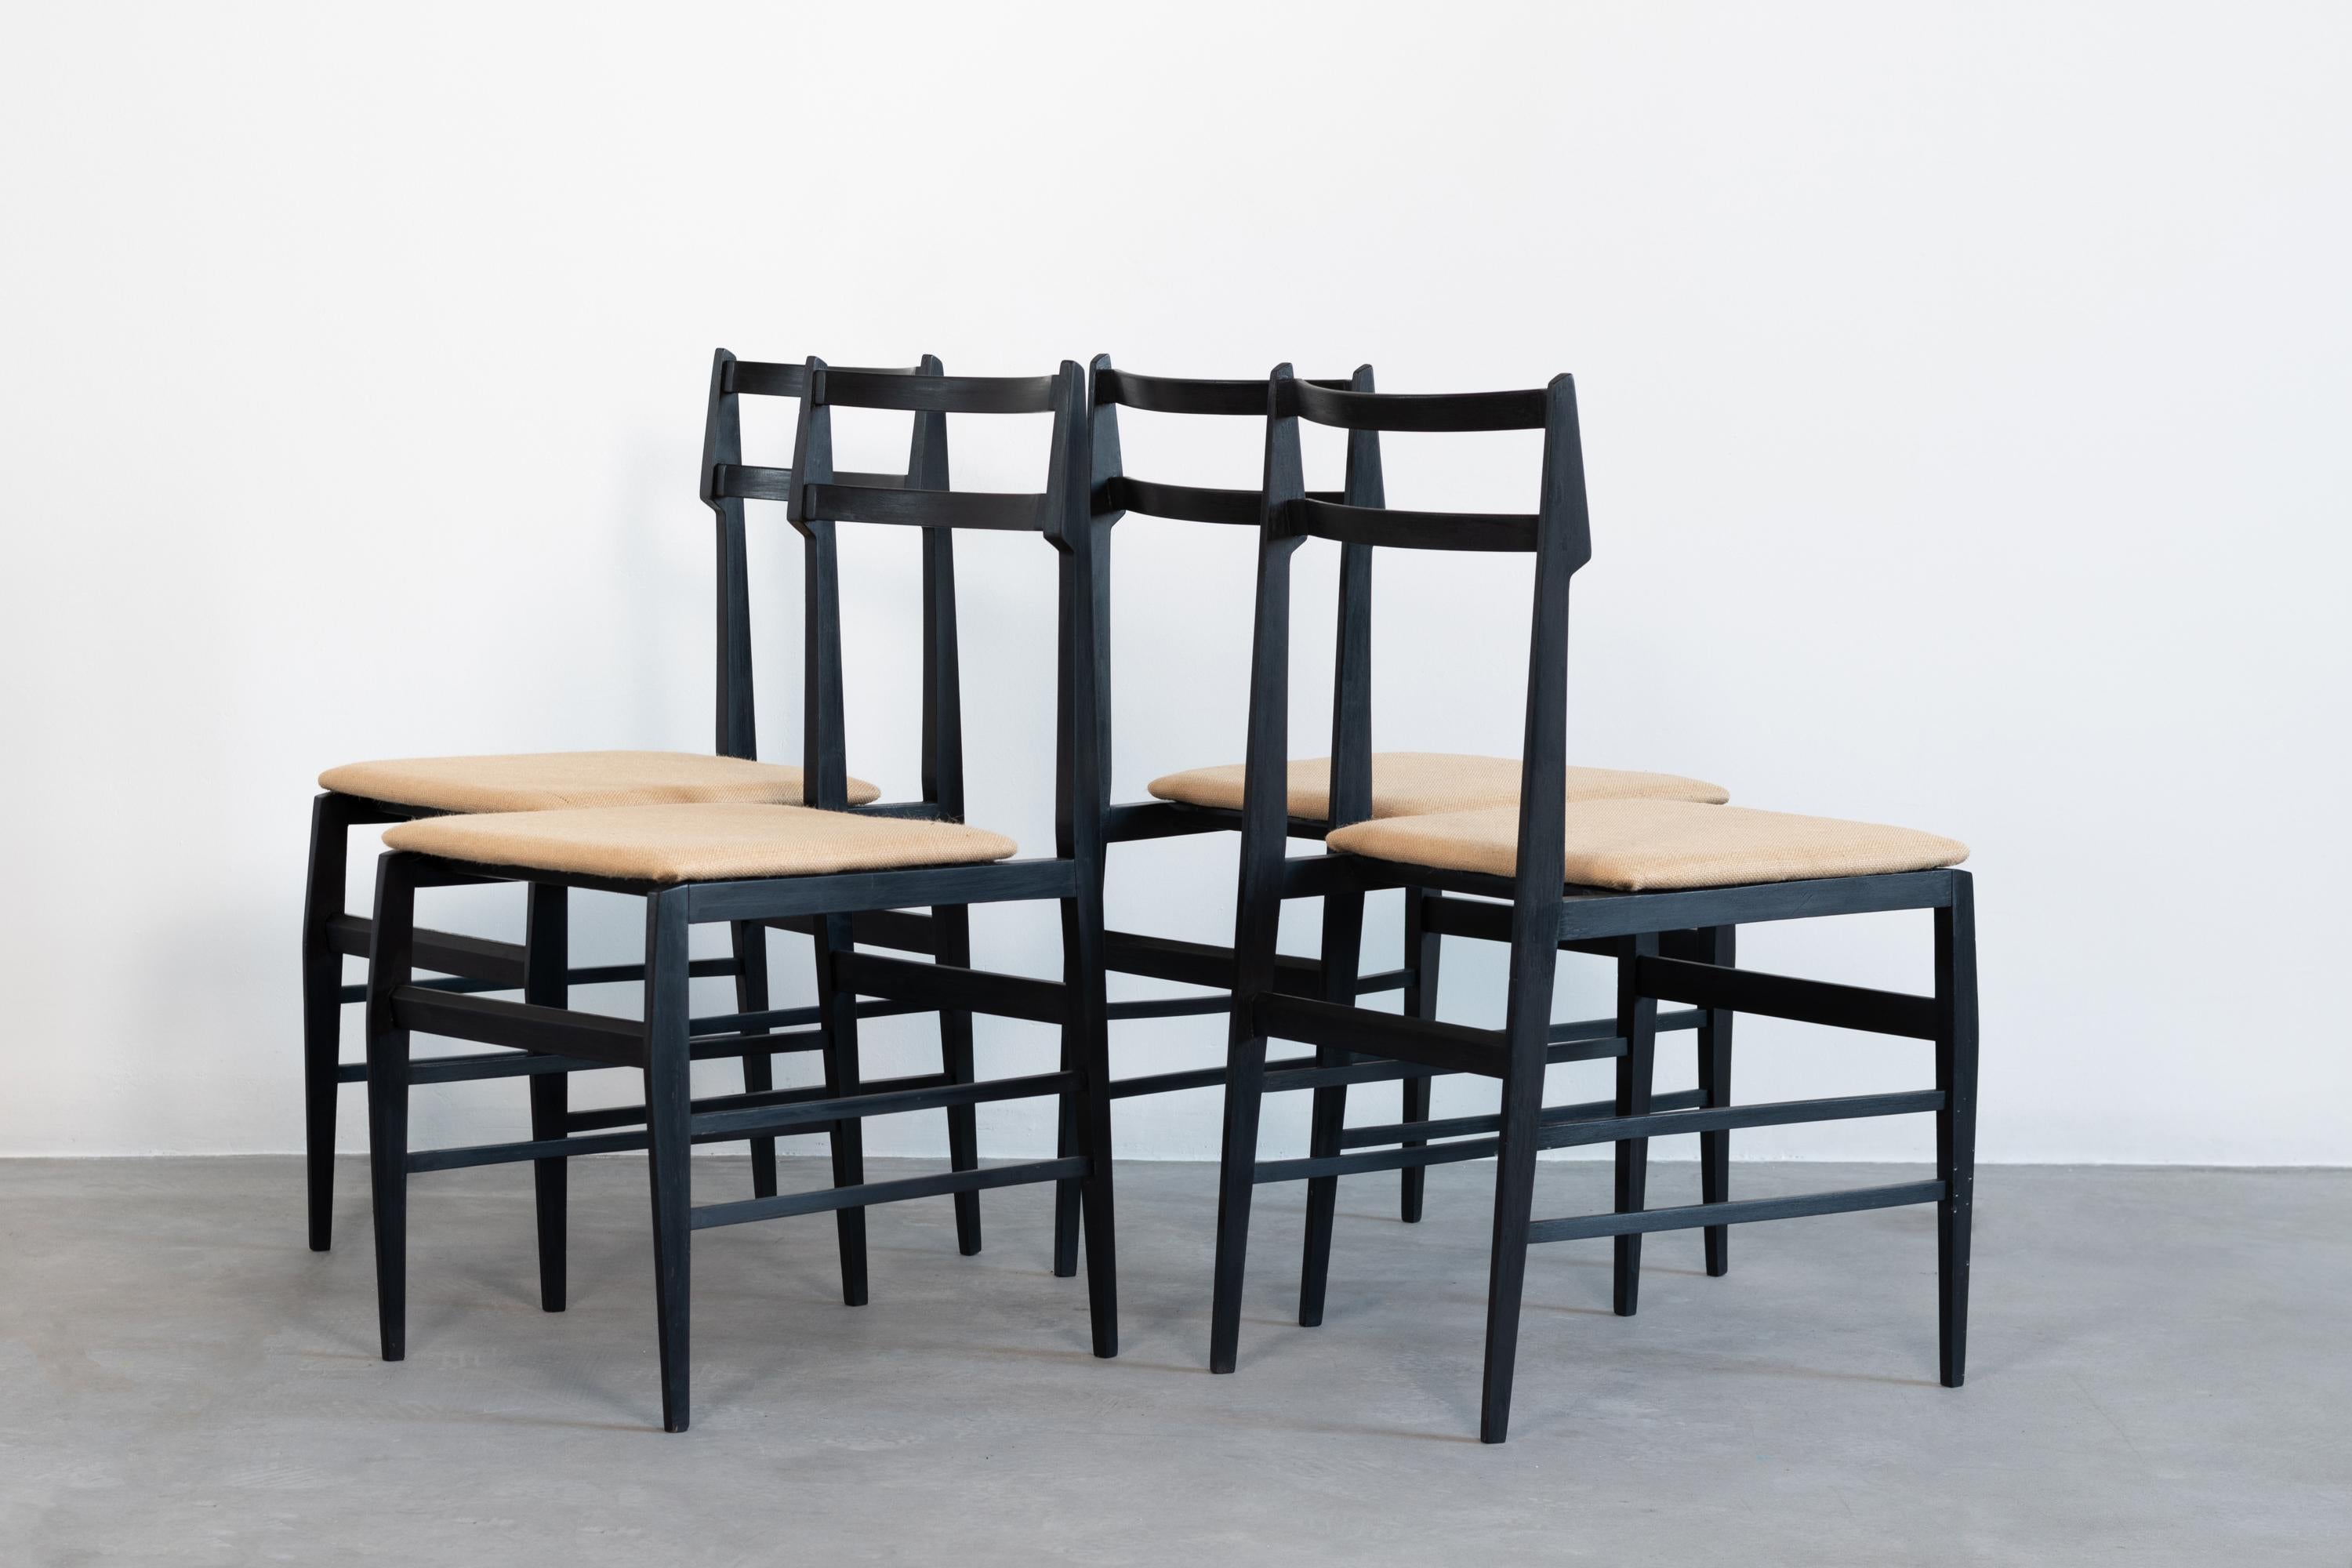 Four dining chairs by Guglielmo Ulrich (attrib.), with ebonized wood structure covered with fabric, produced by Saffa, in 1960s. 
Measurements: 83 x 41 x 50 cm (each)

Guglielmo Ulrich was an Italian architect. He was a student of ‘Scuola